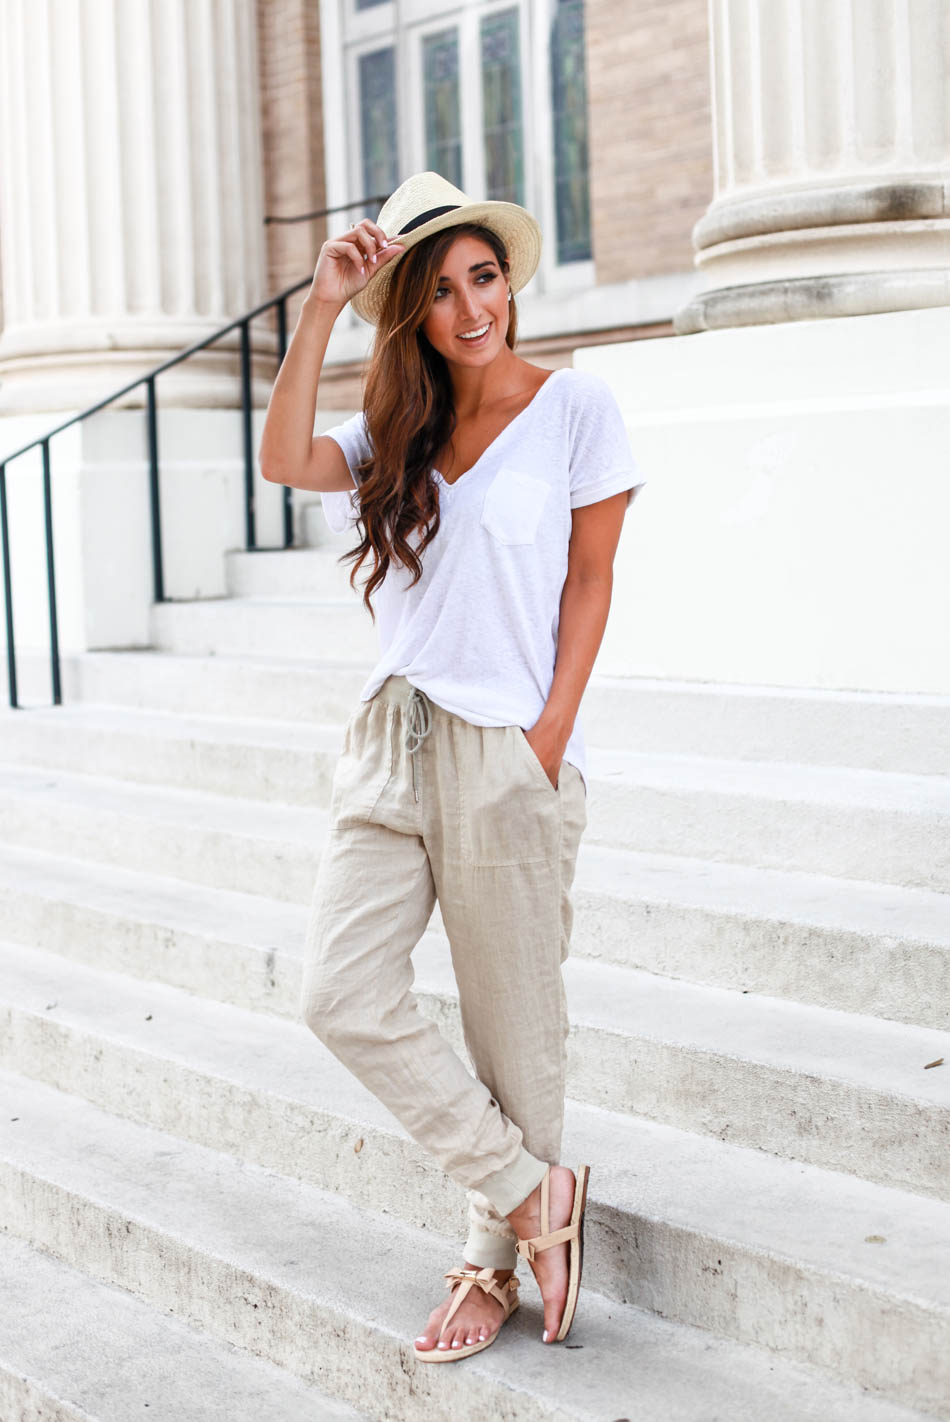 Comfy Outfit Ideas That Are Chic Enough to Wear In Public